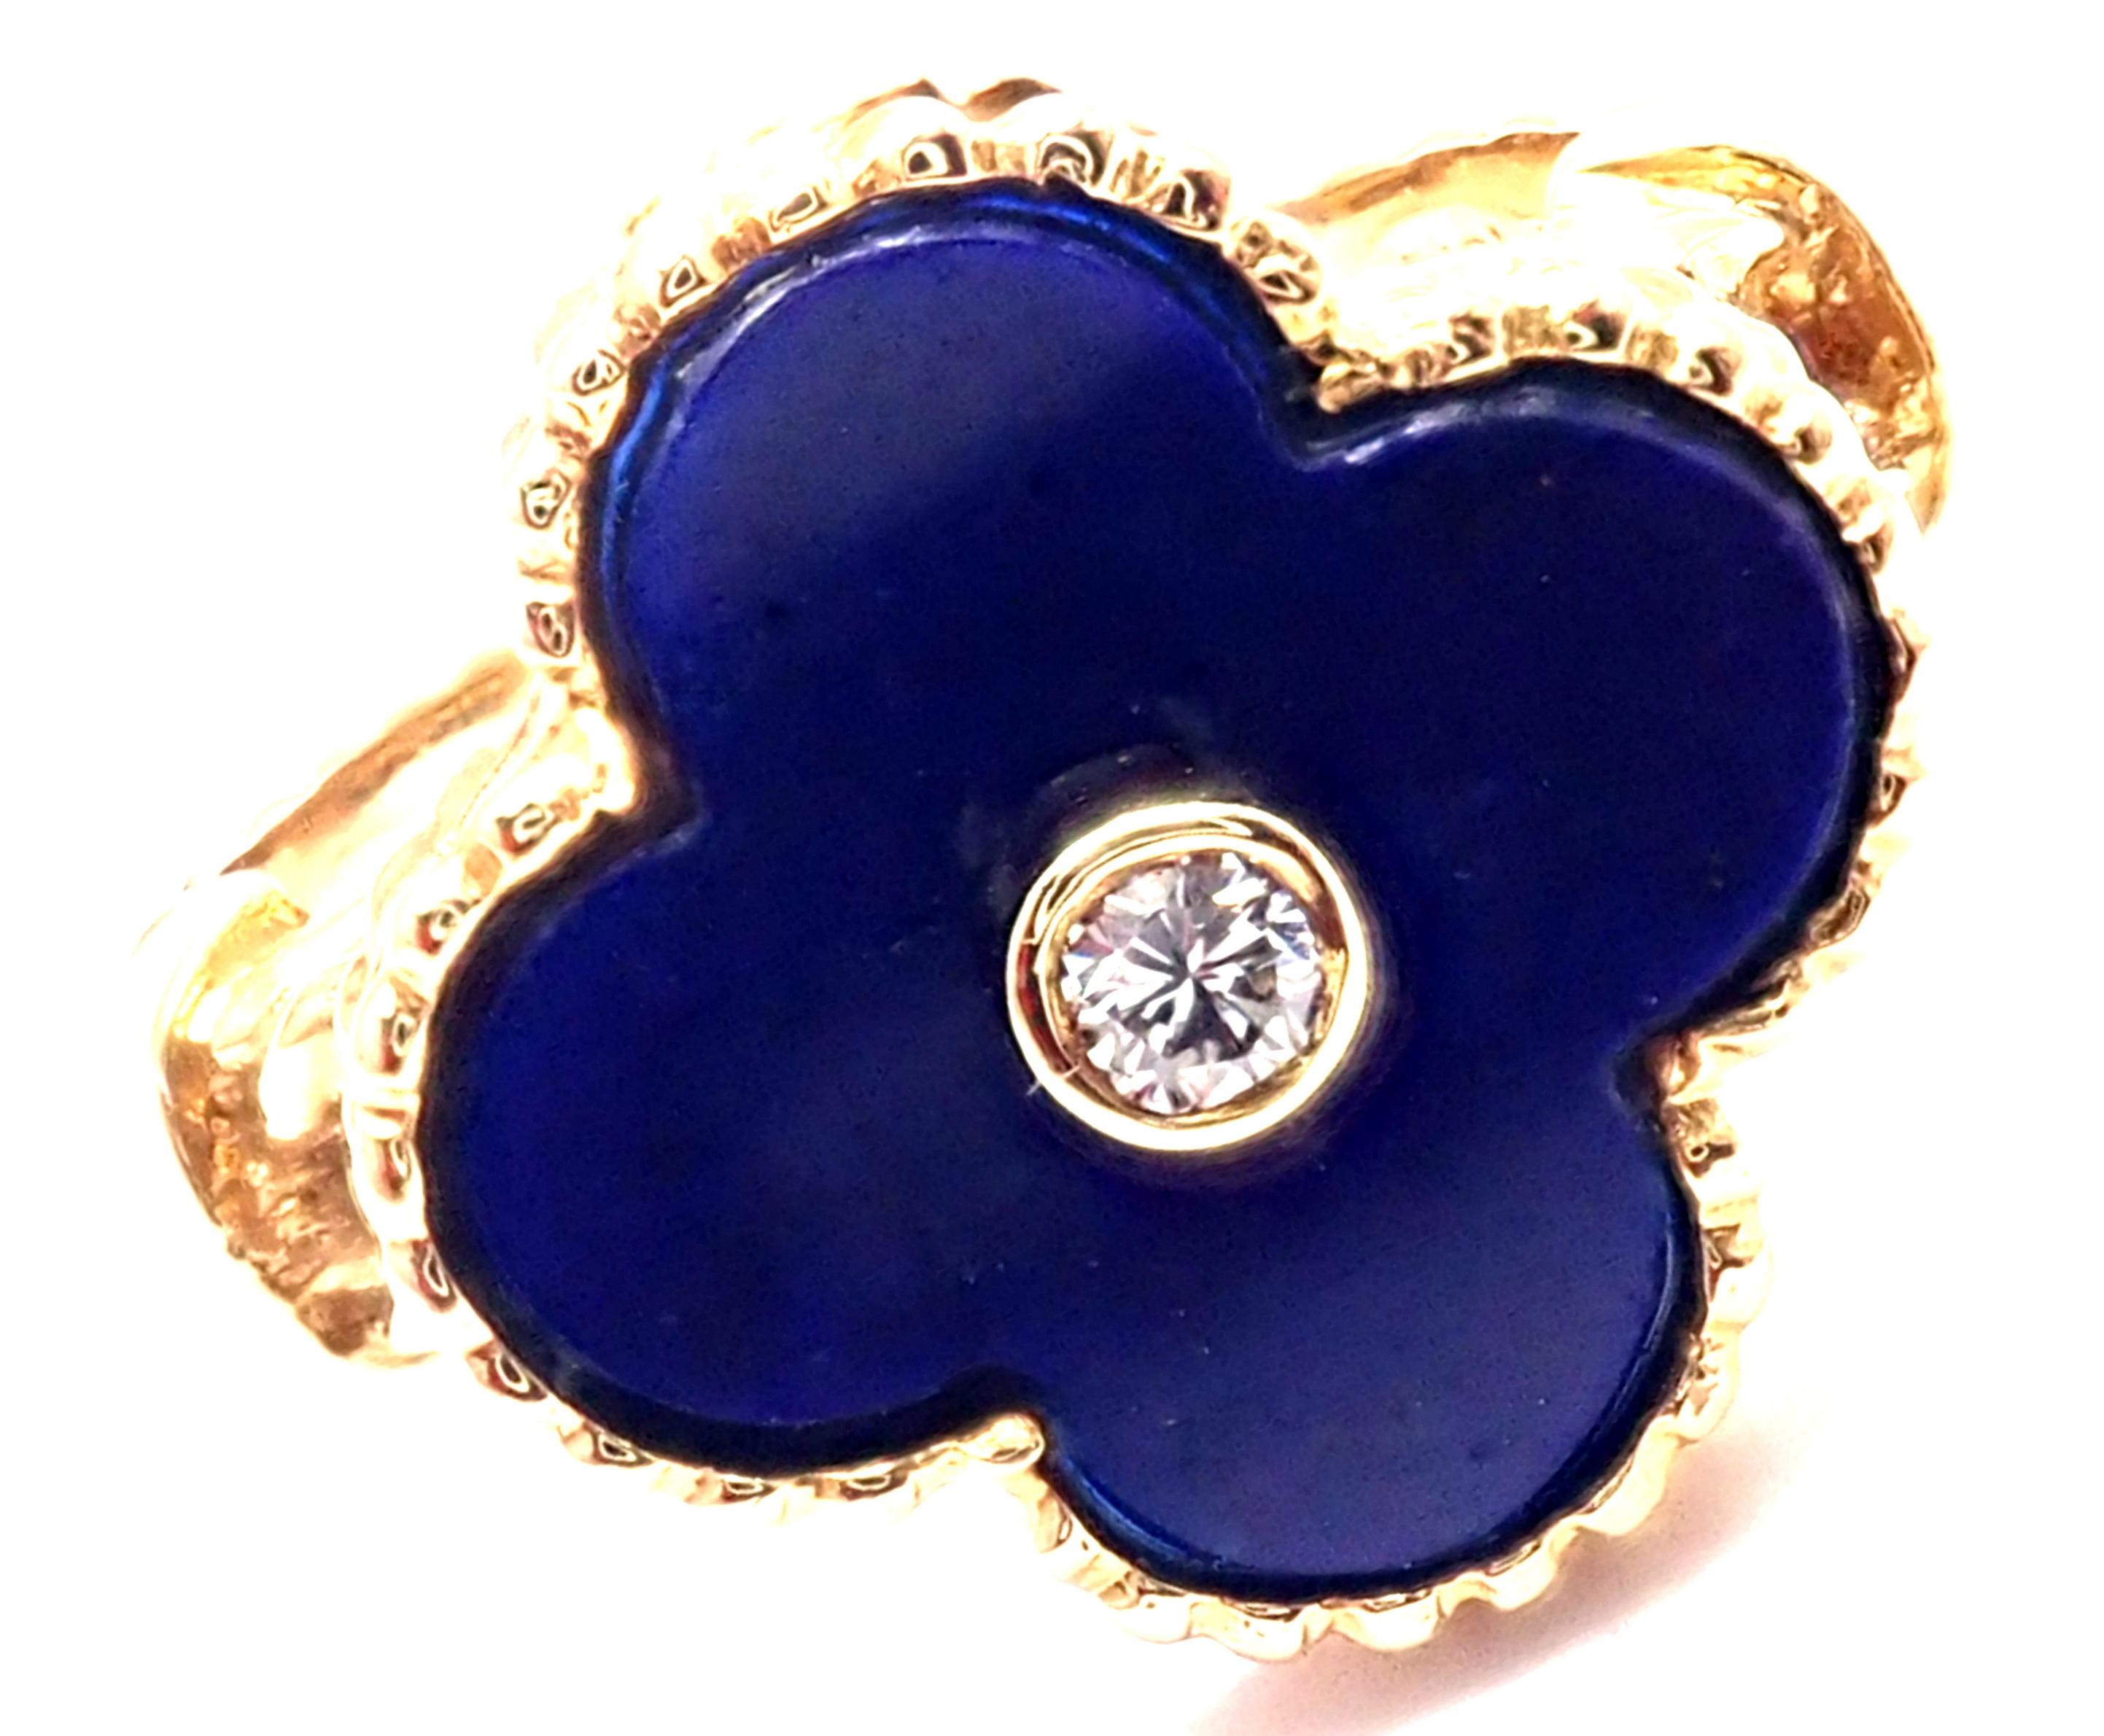 Van Cleef & Arpels Vintage Alhambra 18k Yellow Gold Diamond Lapis Lazuli Ring. 
With 1 Round brilliant cut diamond .06ct F/VS1 Alhambra cut lapis lazuli  
Details: 
Size: 4 (resize available)
Width: 14mm 
Weight: 5.2 grams 
Stamped Hallmarks: VCA